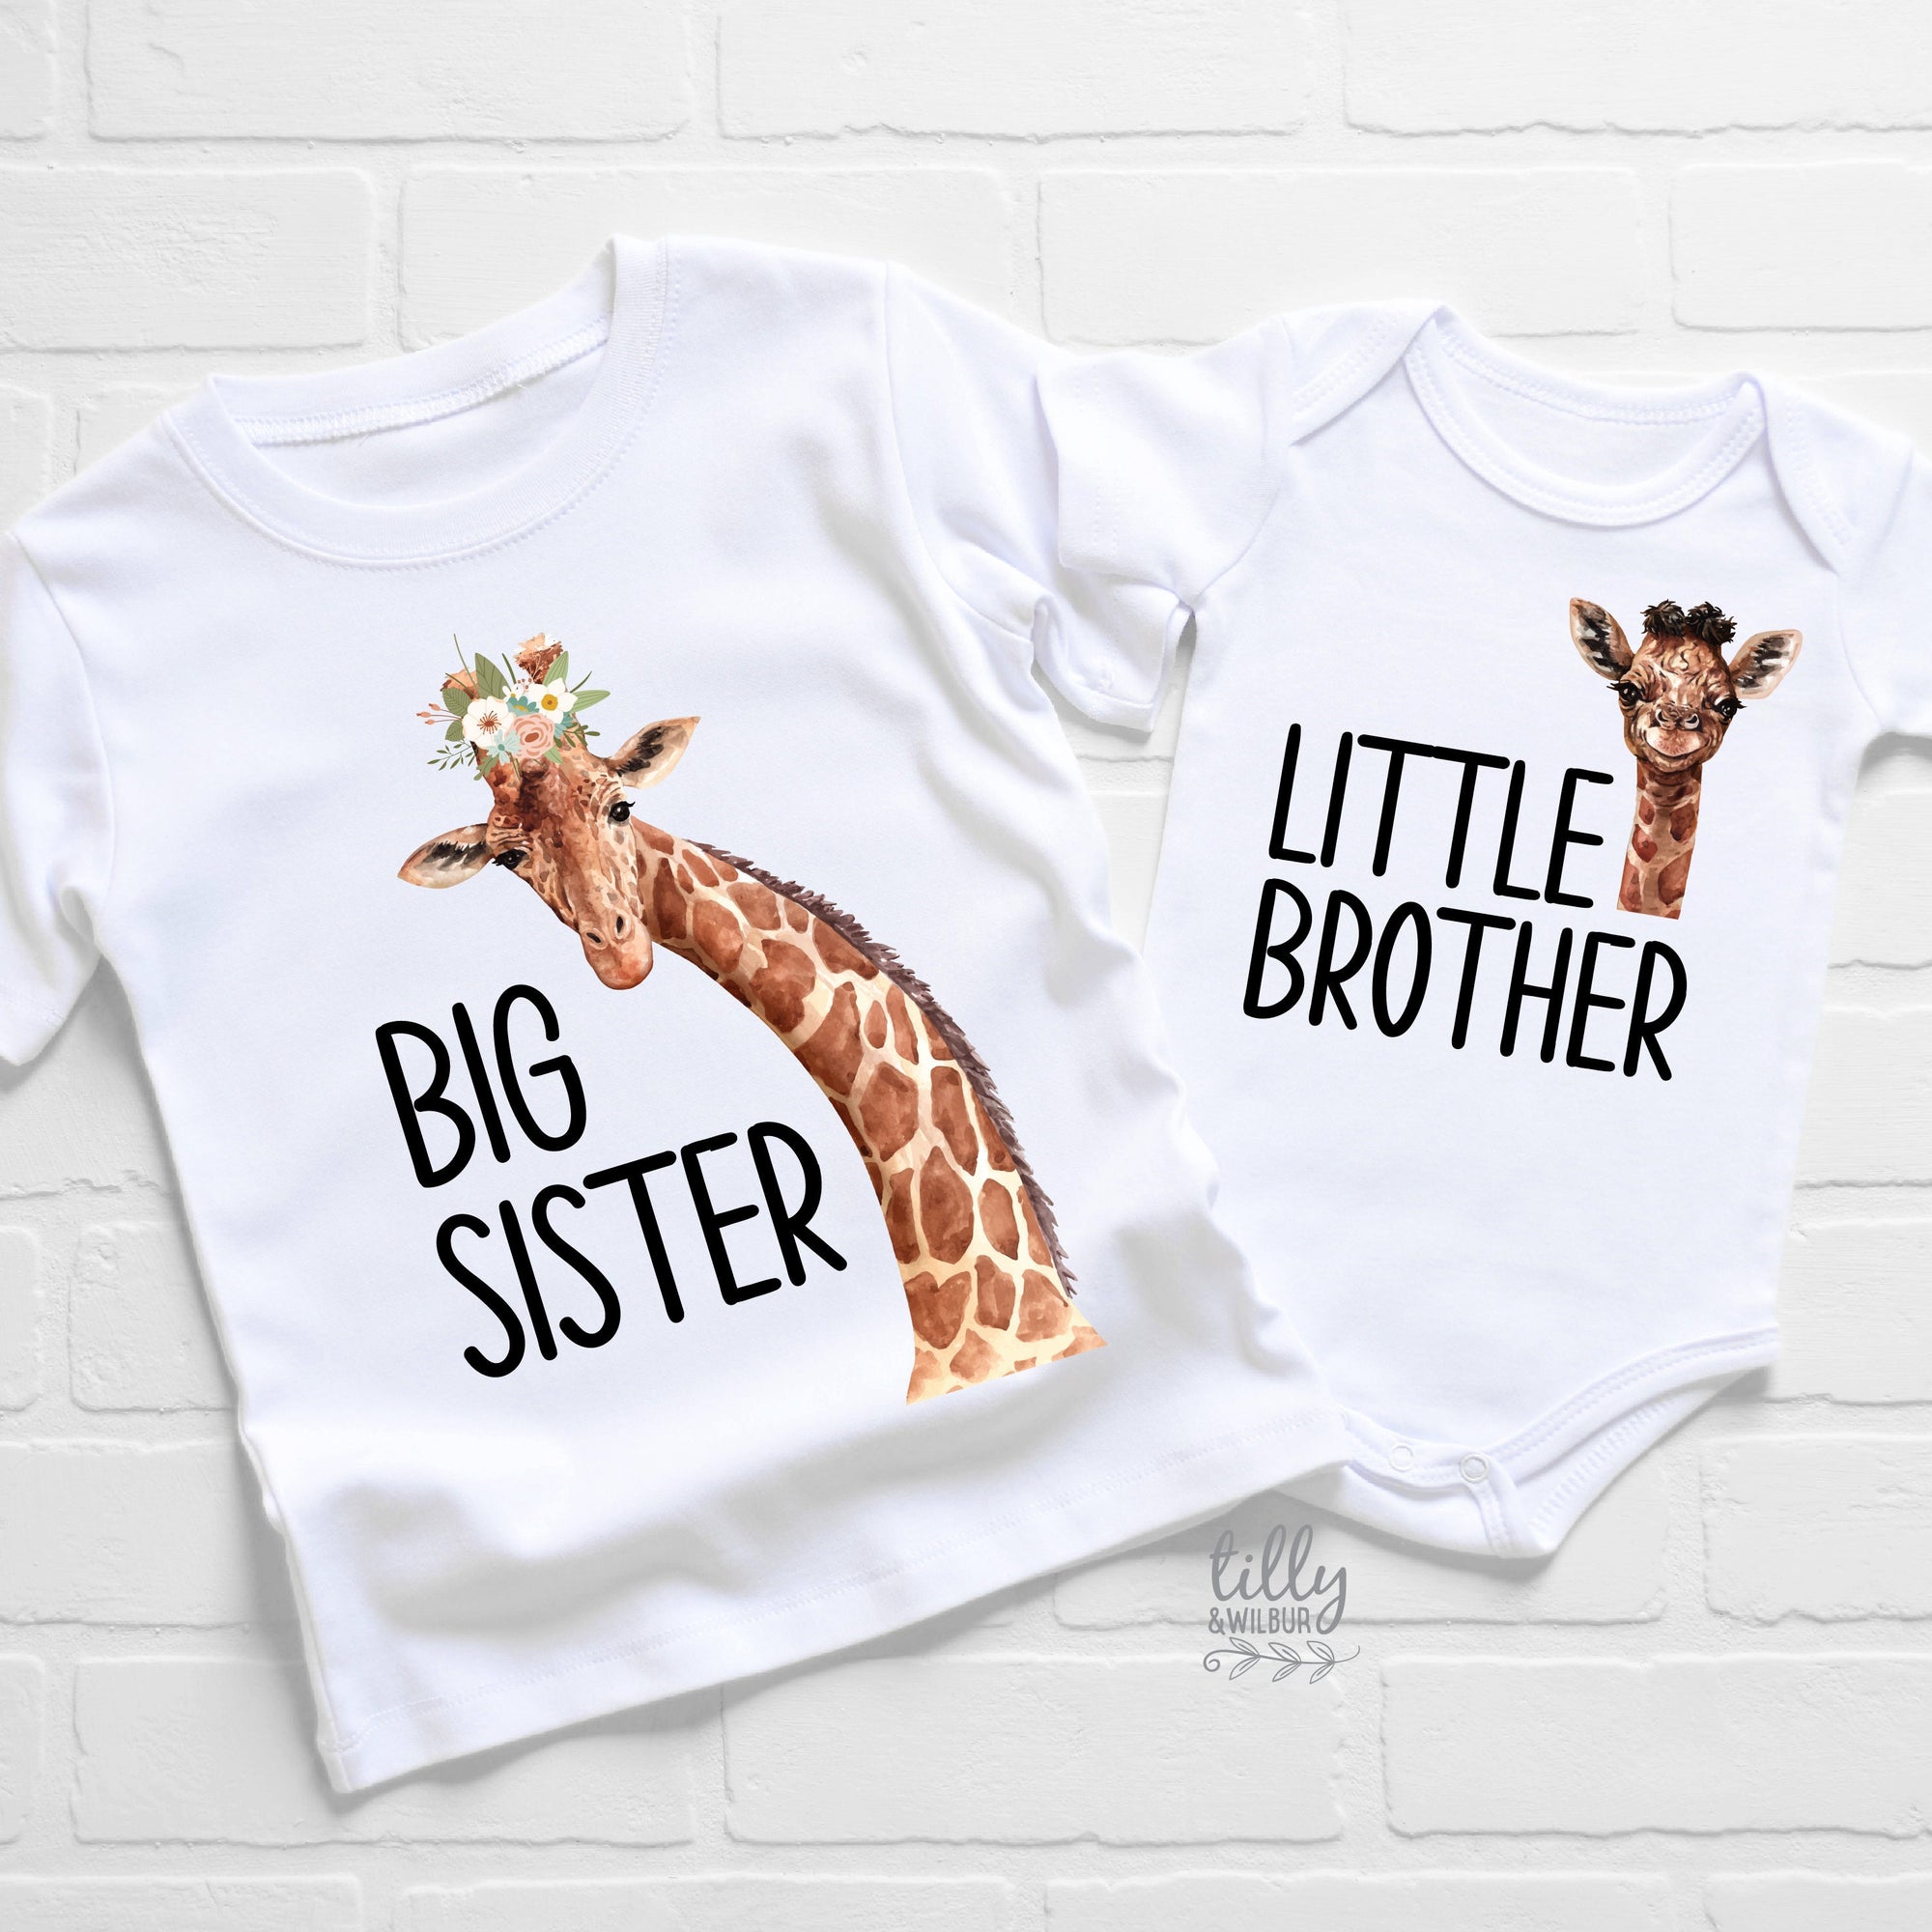 Big Sister Little Brother Set, Matching Sibling Outfits, Sibling T-Shirts, Big Sister Shirt, Little Brother Bodysuit, New Baby Gift, Newborn